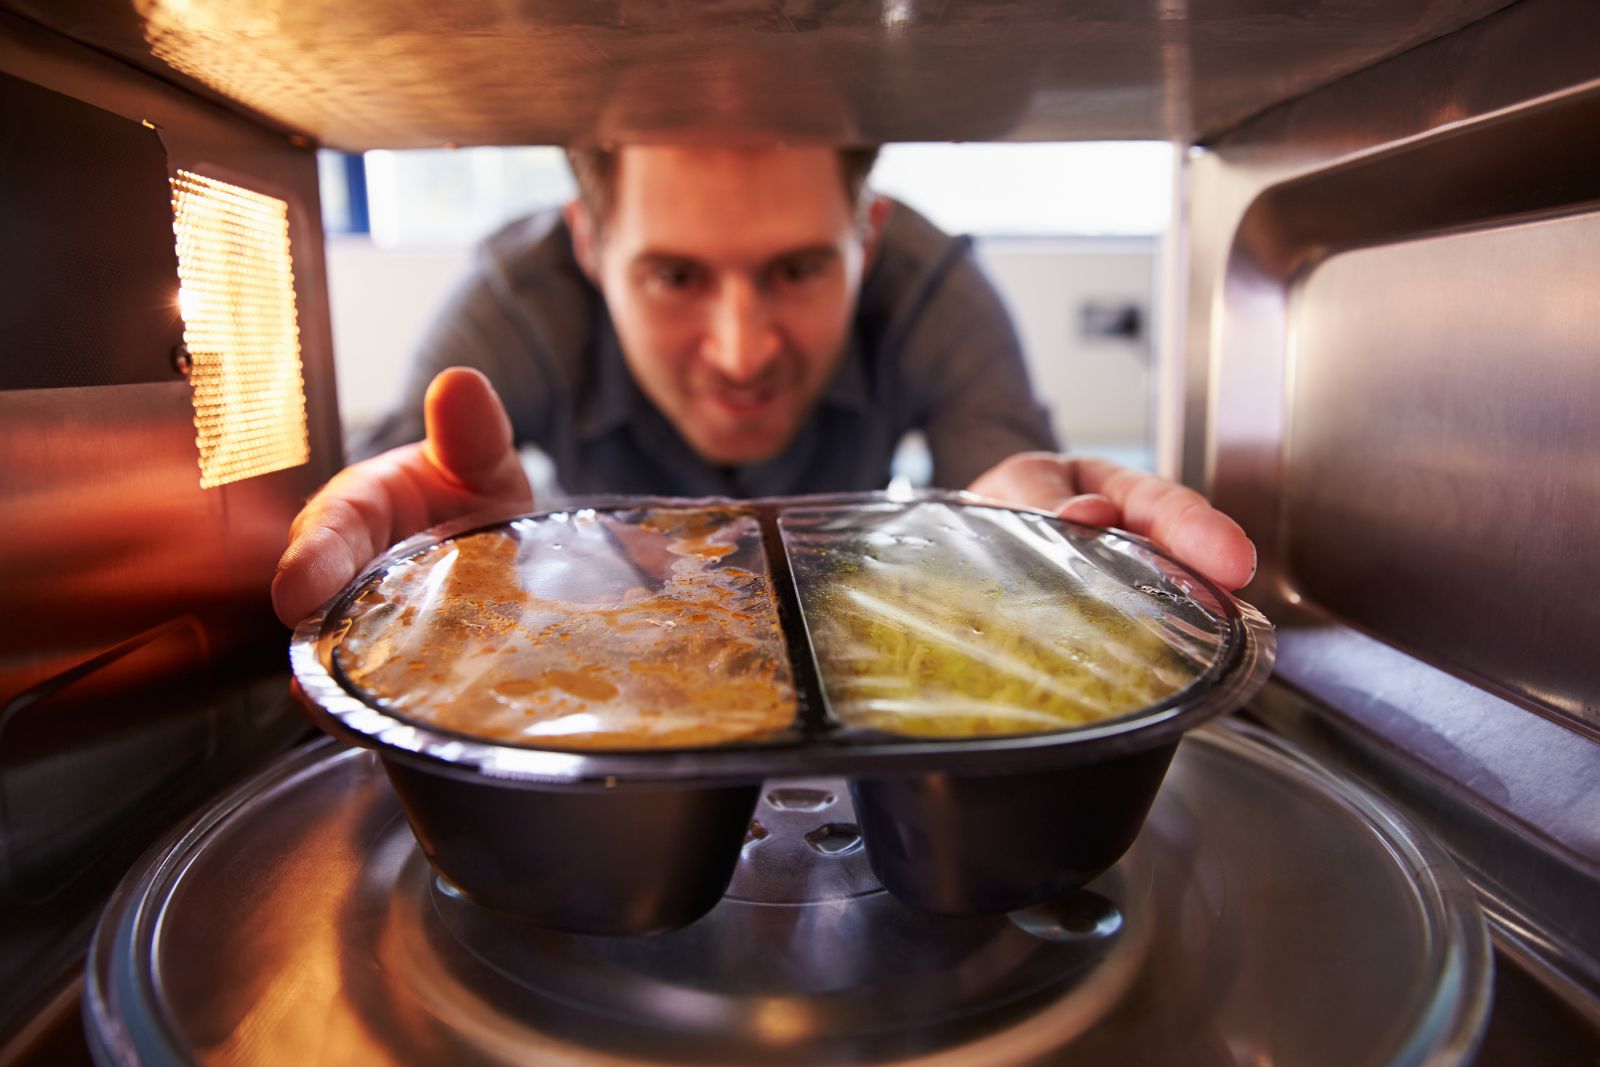 The dangers of microwaves revealed